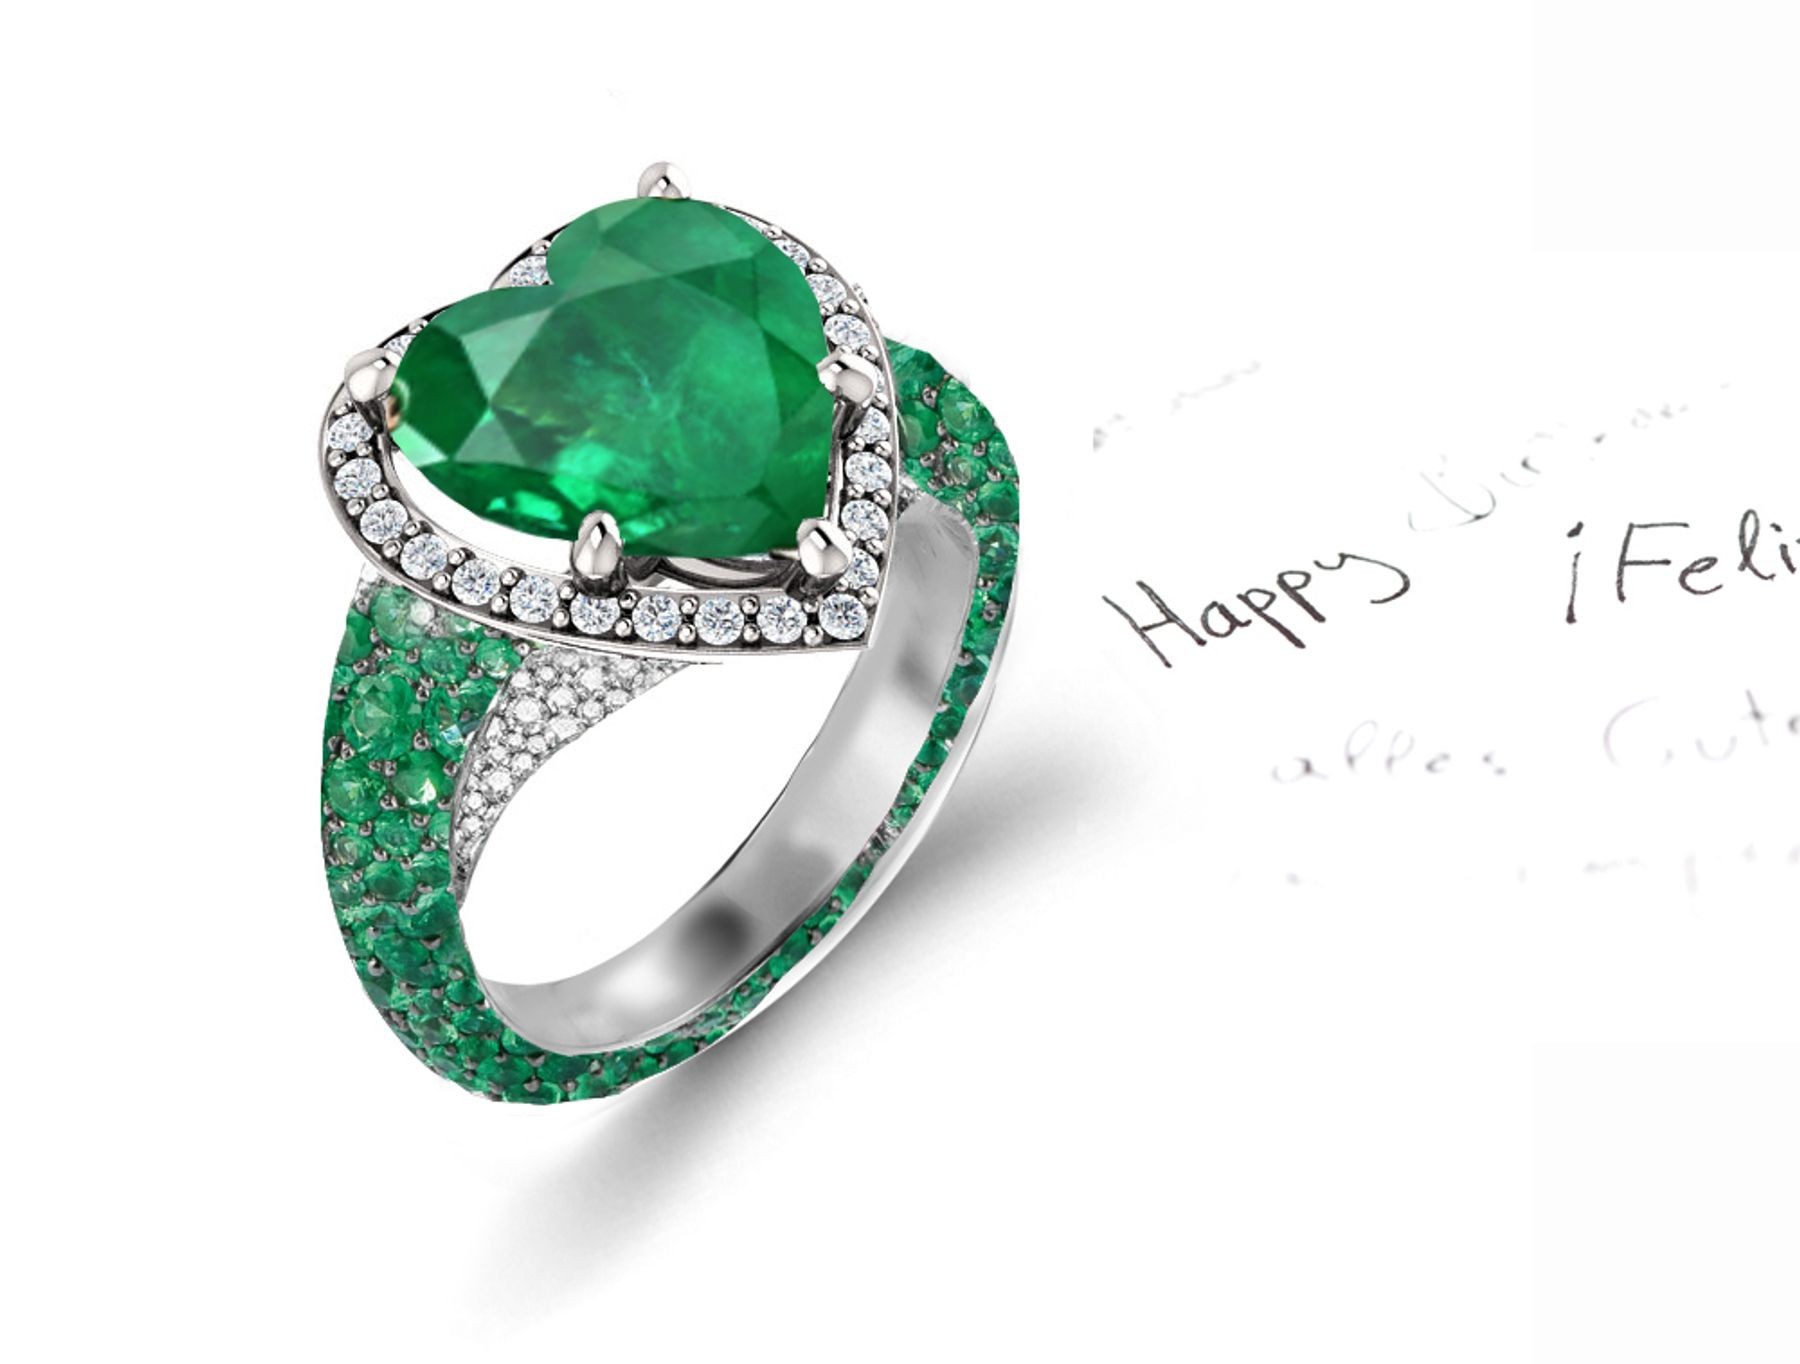 Made to Order Micro Pave Halo Round Diamonds & Heart Shaped Emerald Rings